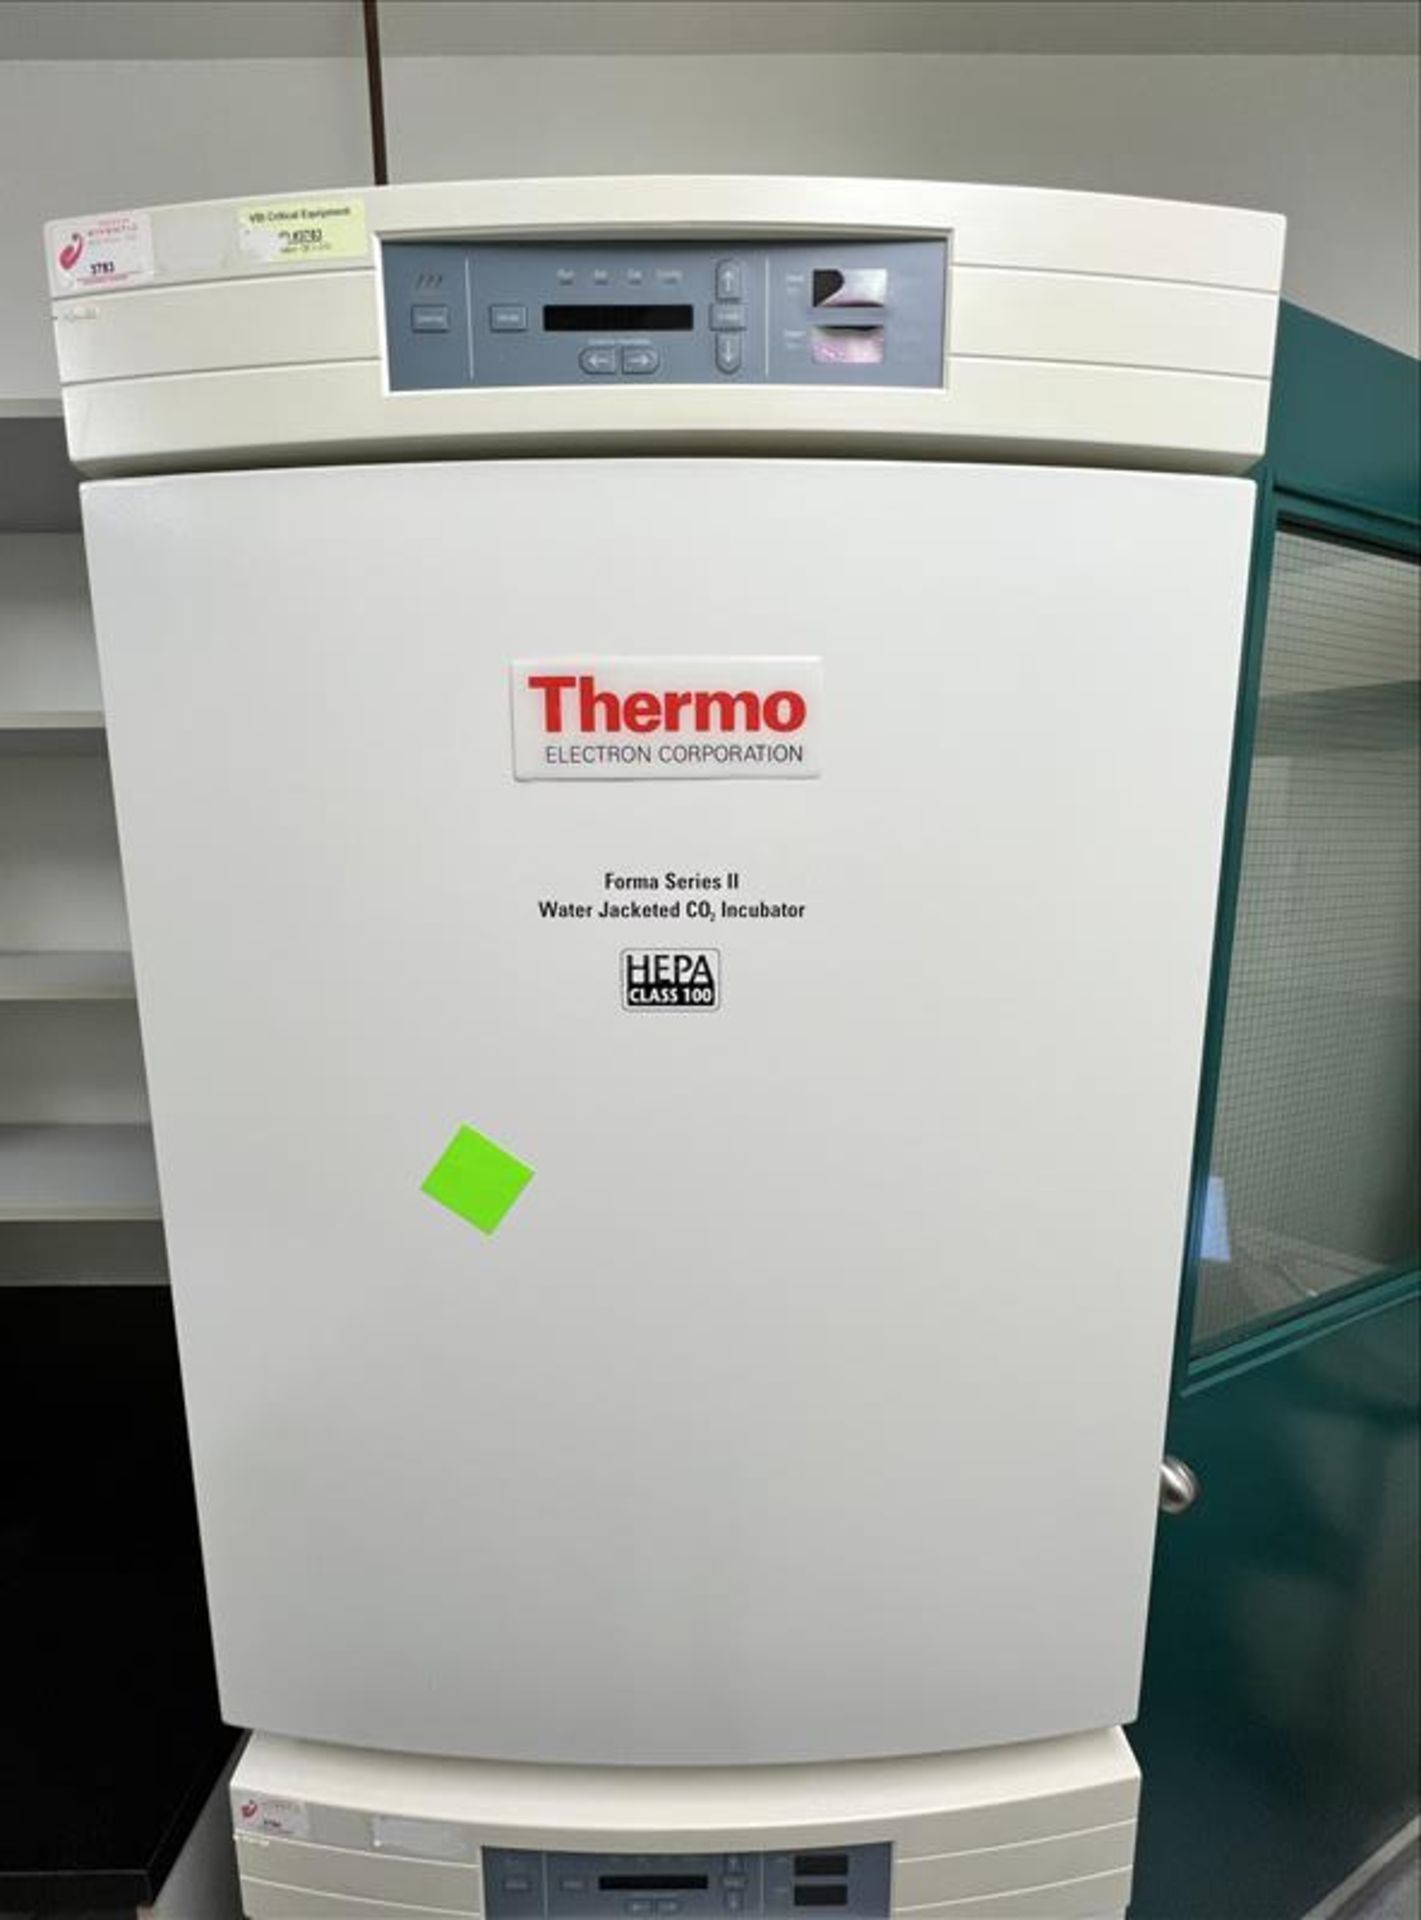 Thermo Electron Double Stack Water Jacketed CO2 Incubator mod. 3110 S/N 304596-27339 - Image 2 of 3